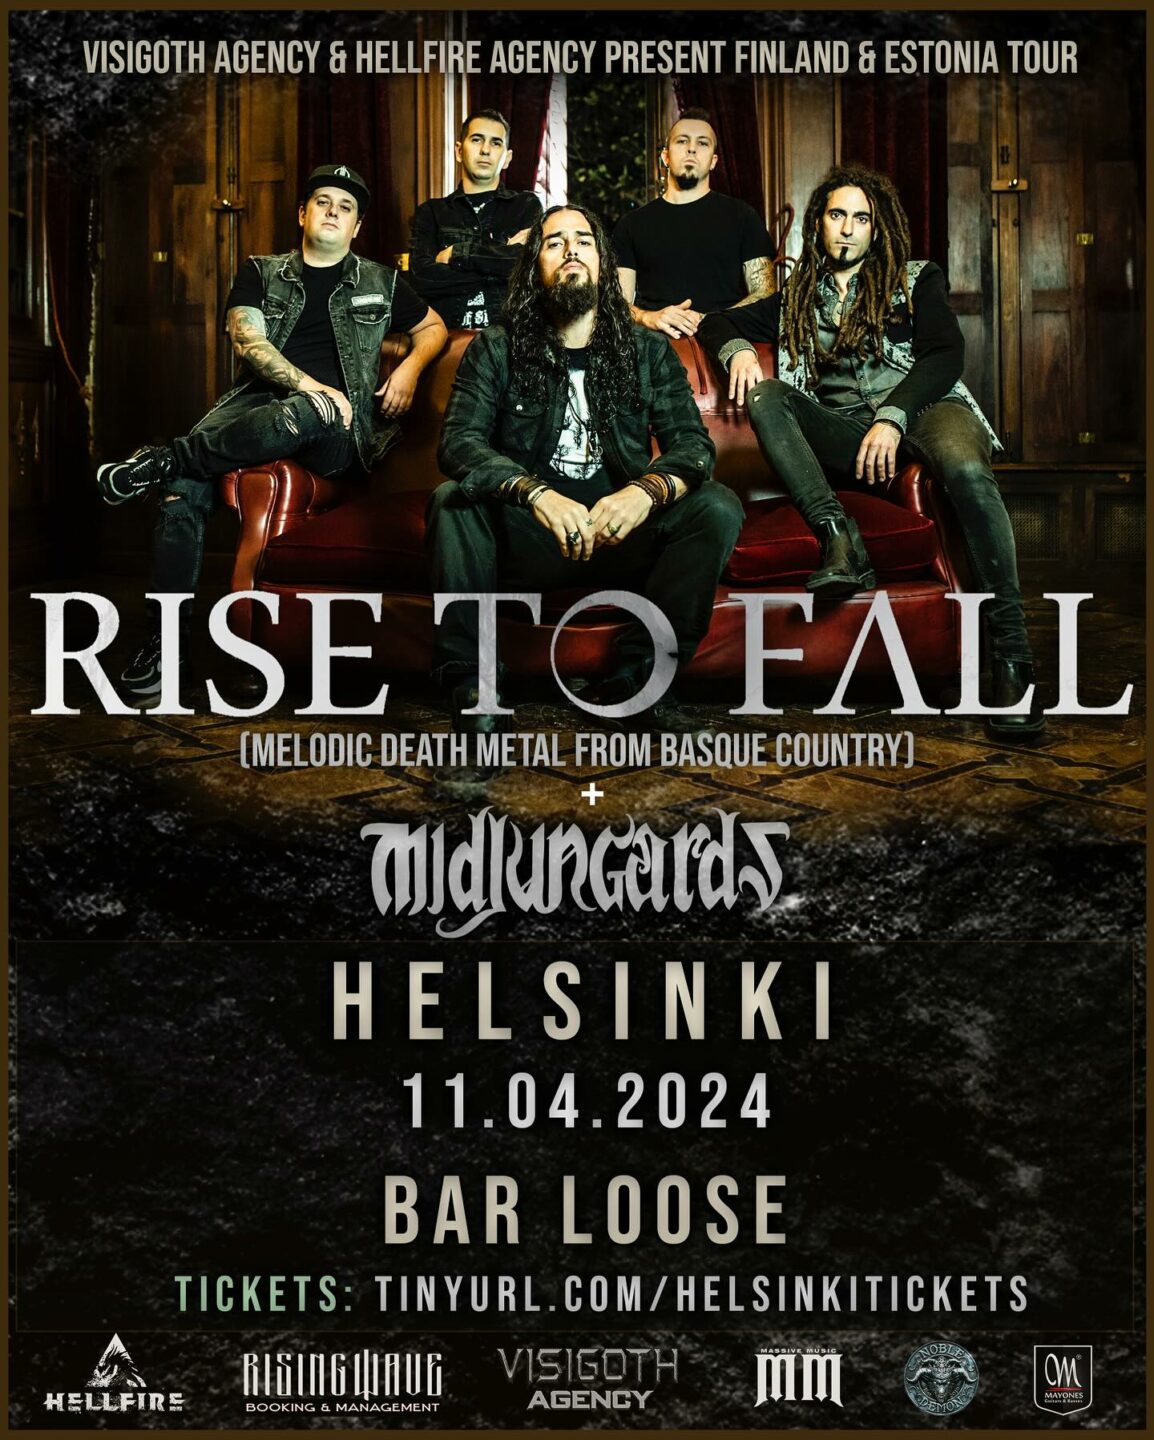 RISE TO FALL + Midjungards